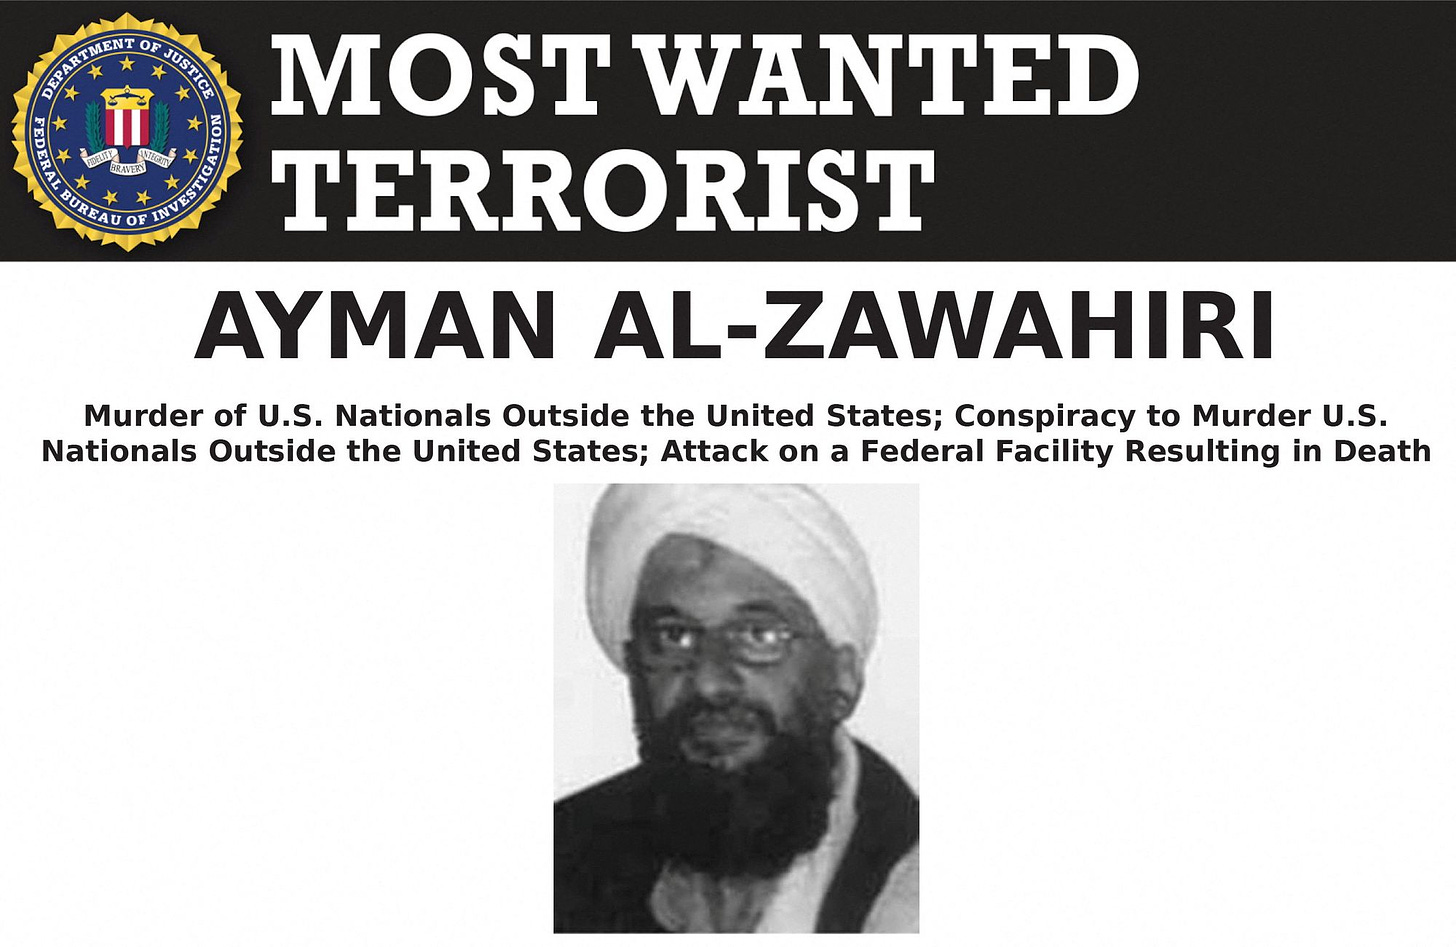 After the killing of al-Zawahri, here is the FBI’s list of most wanted terrorists